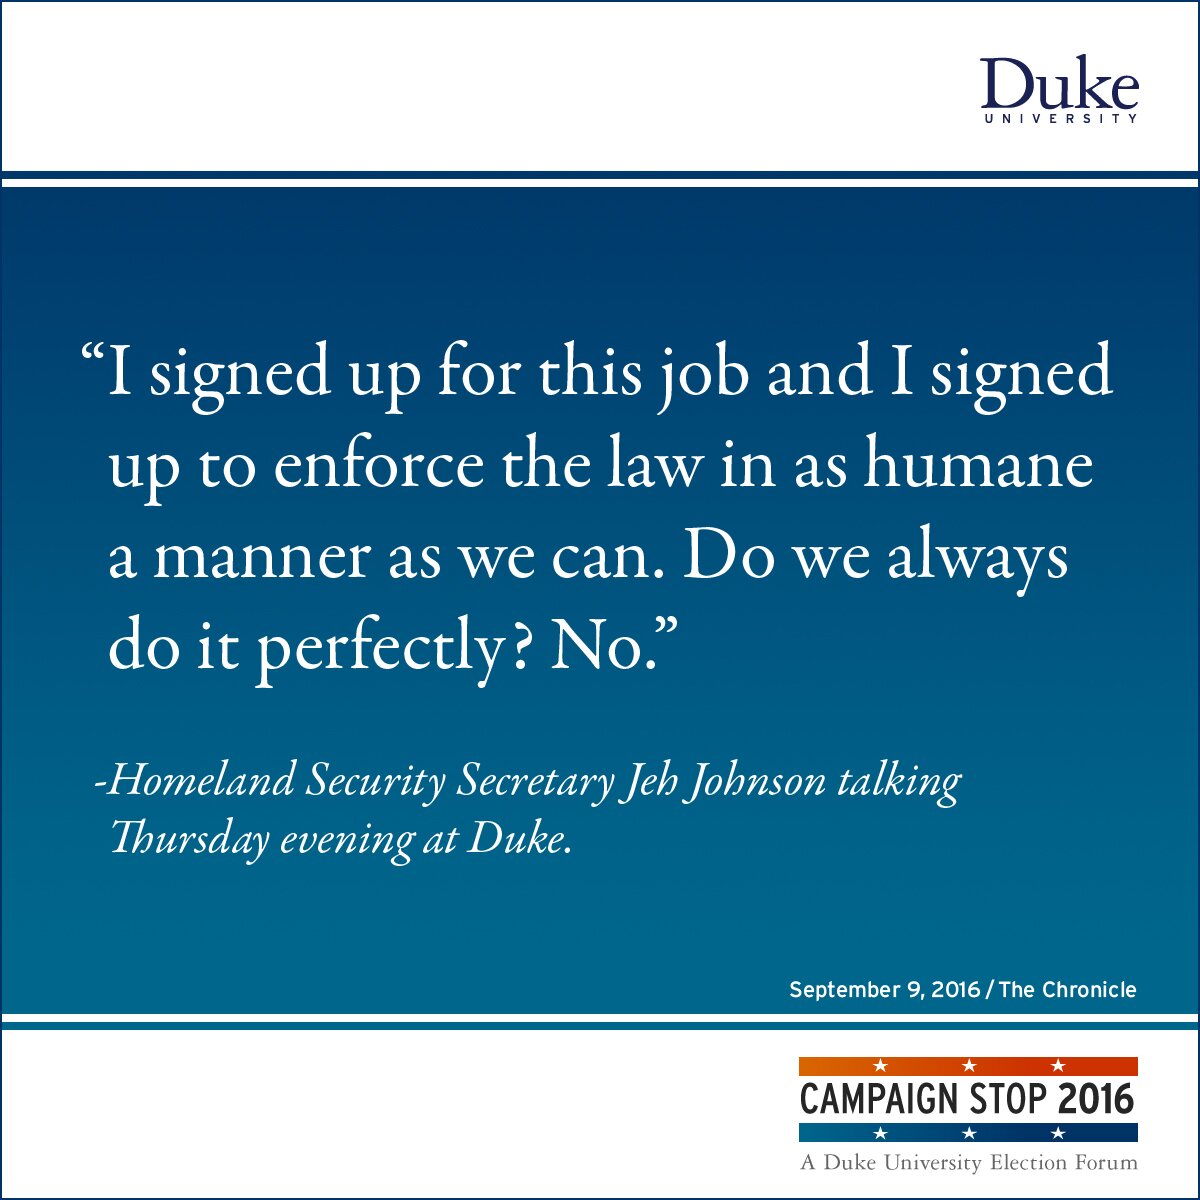 “I signed up for this job and I signed up to enforce the law in as humane a manner as we can. Do we always do it perfectly? No.” -Homeland Security Secretary Jeh Johnson talking Thursday evening at Duke.